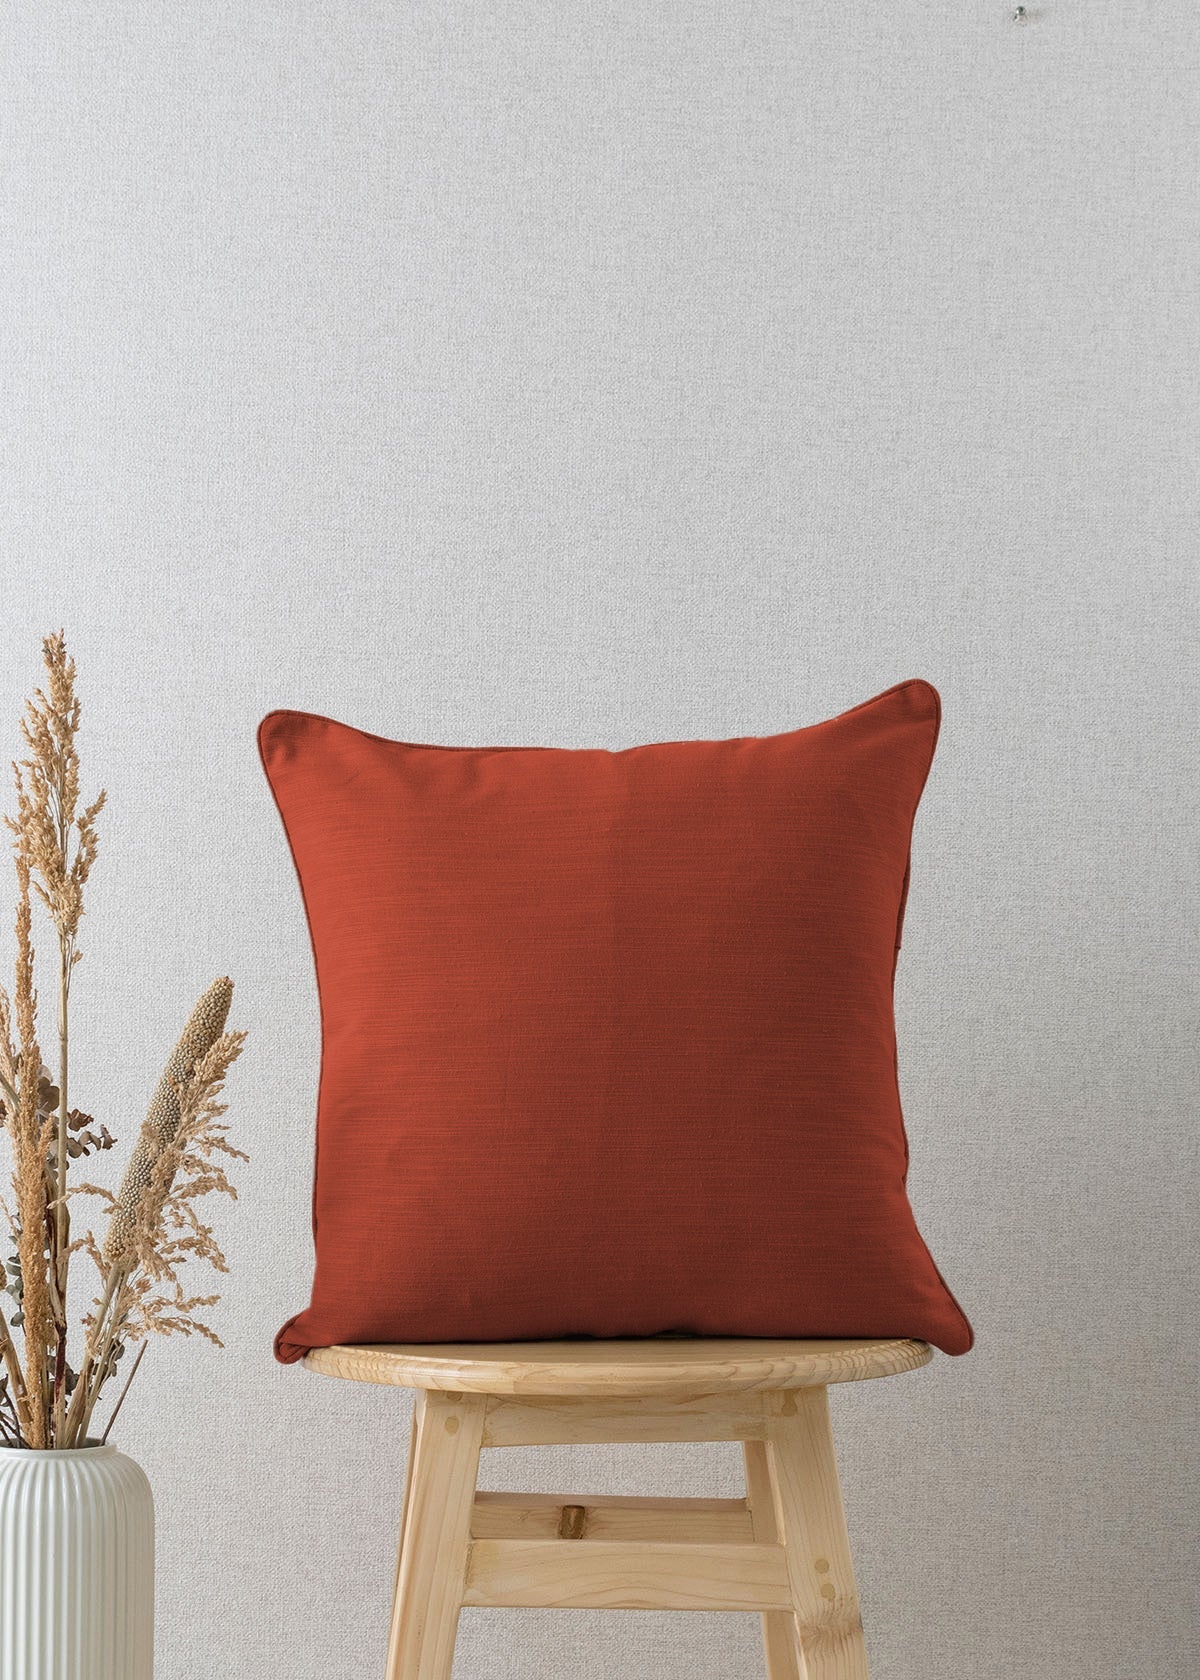 Solid Brick Red 100% cotton plain cushion cover for sofa